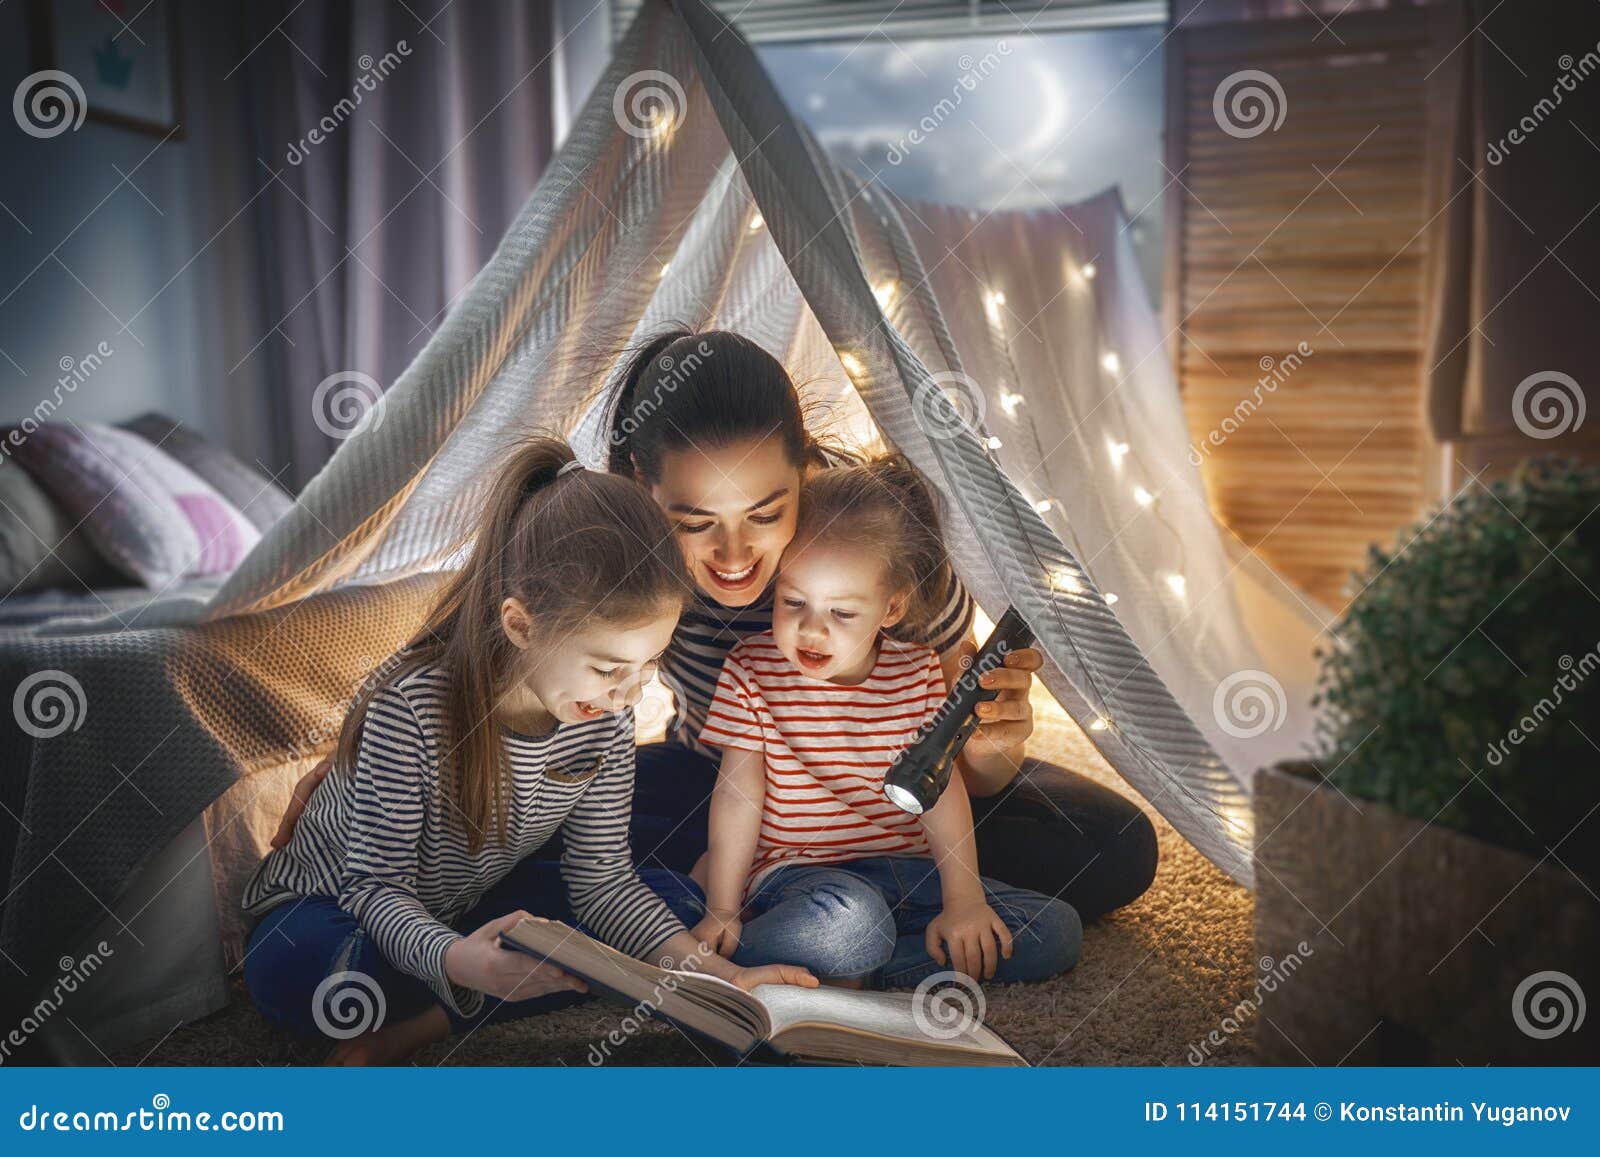 mom and children reading book